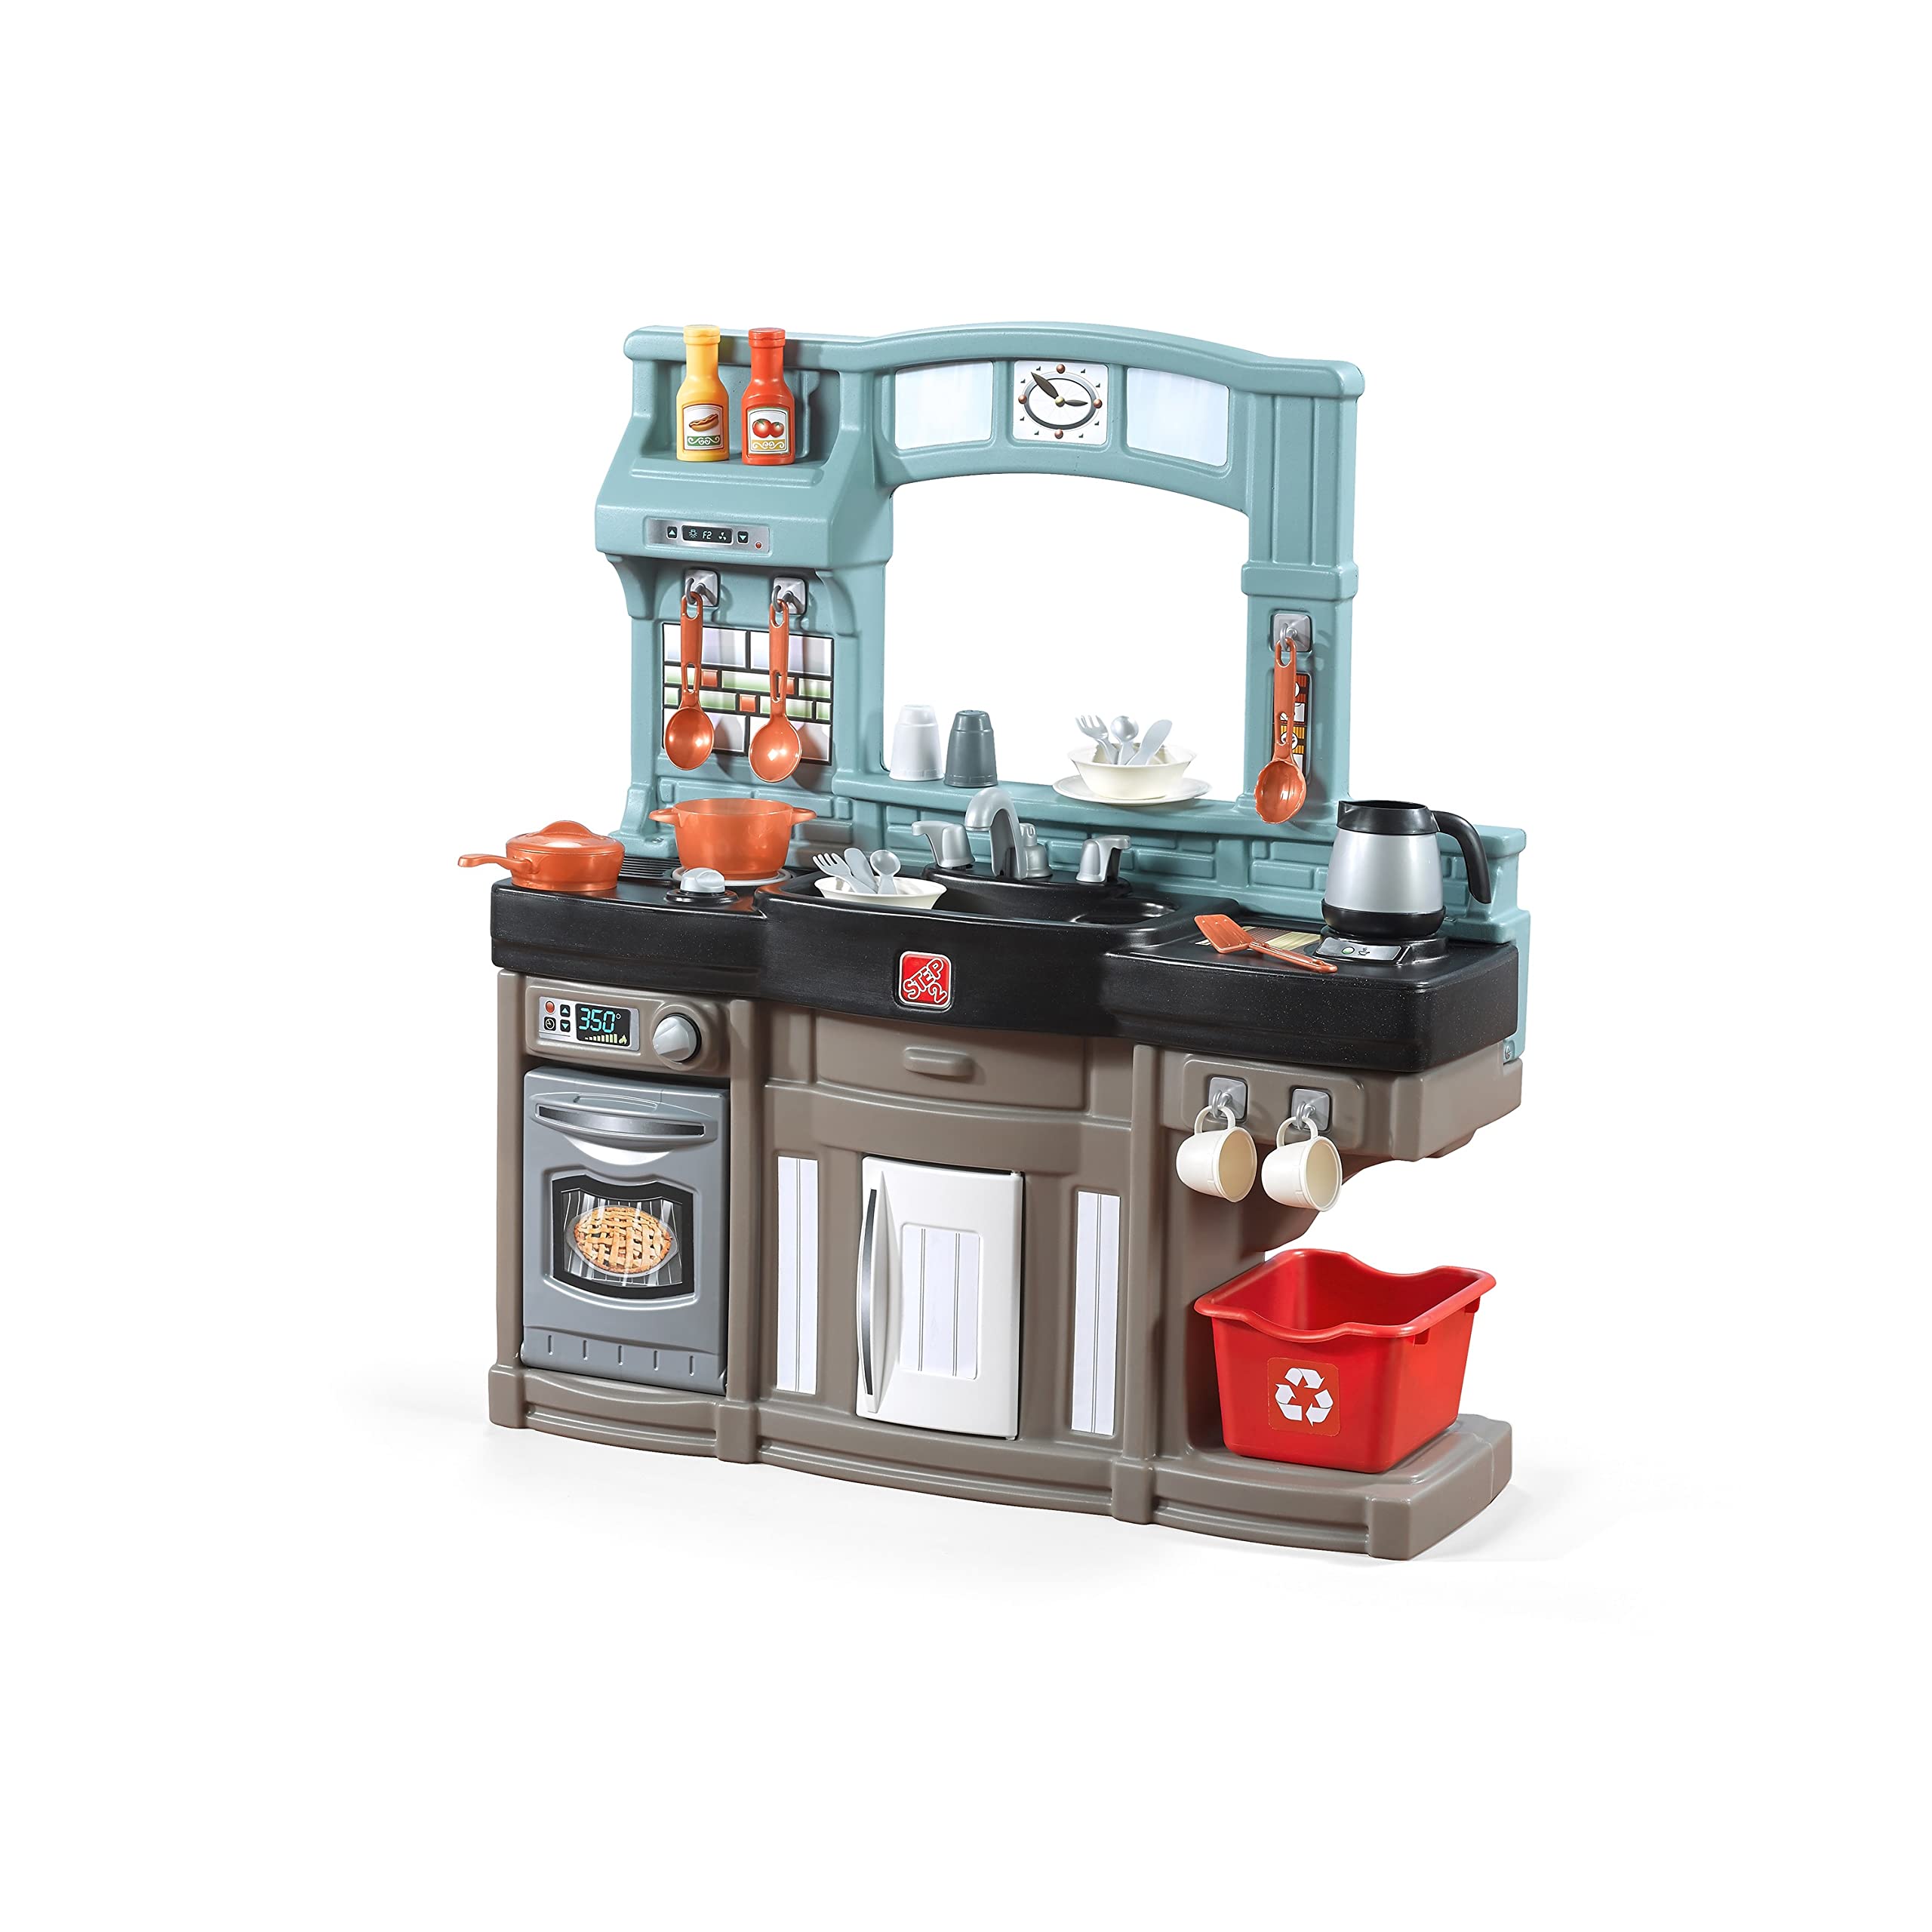 Step2 Best Chefs Kitchen Set for Kids – Includes 25 Toy...